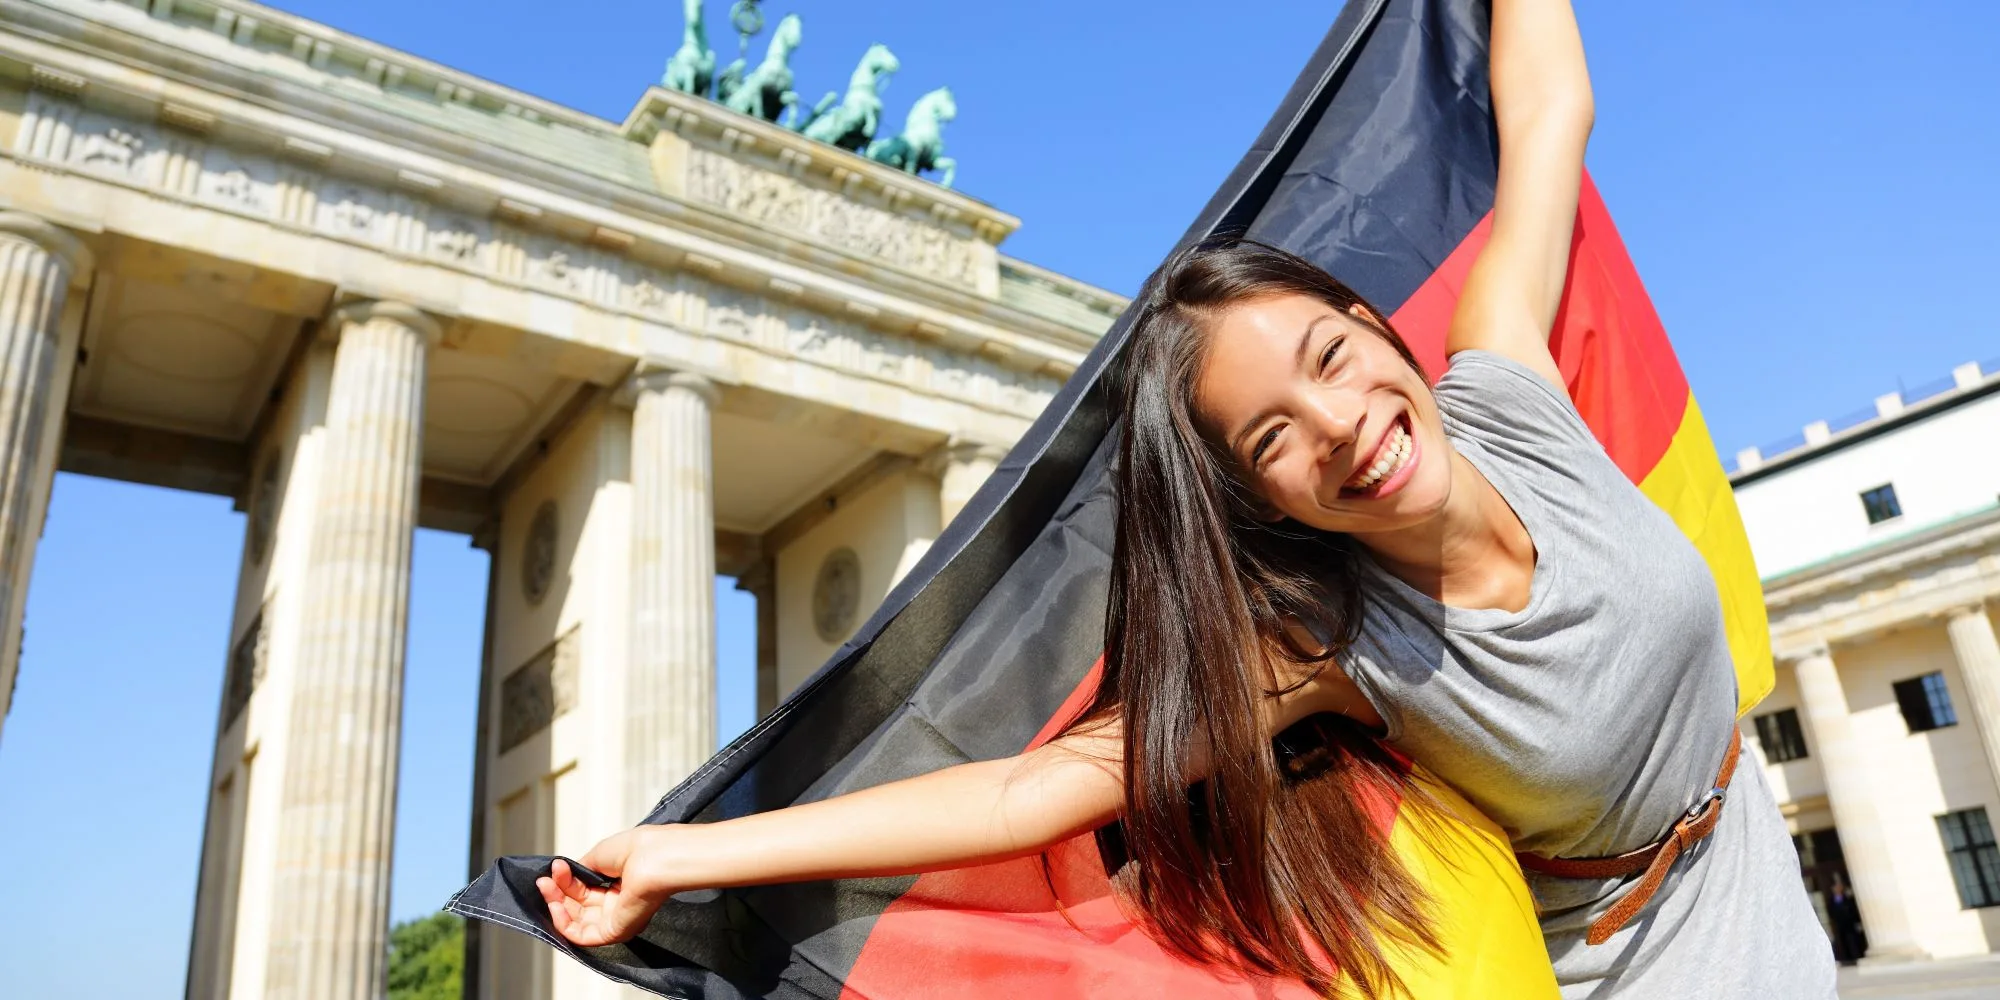 A woman smiling and holding a German flag.